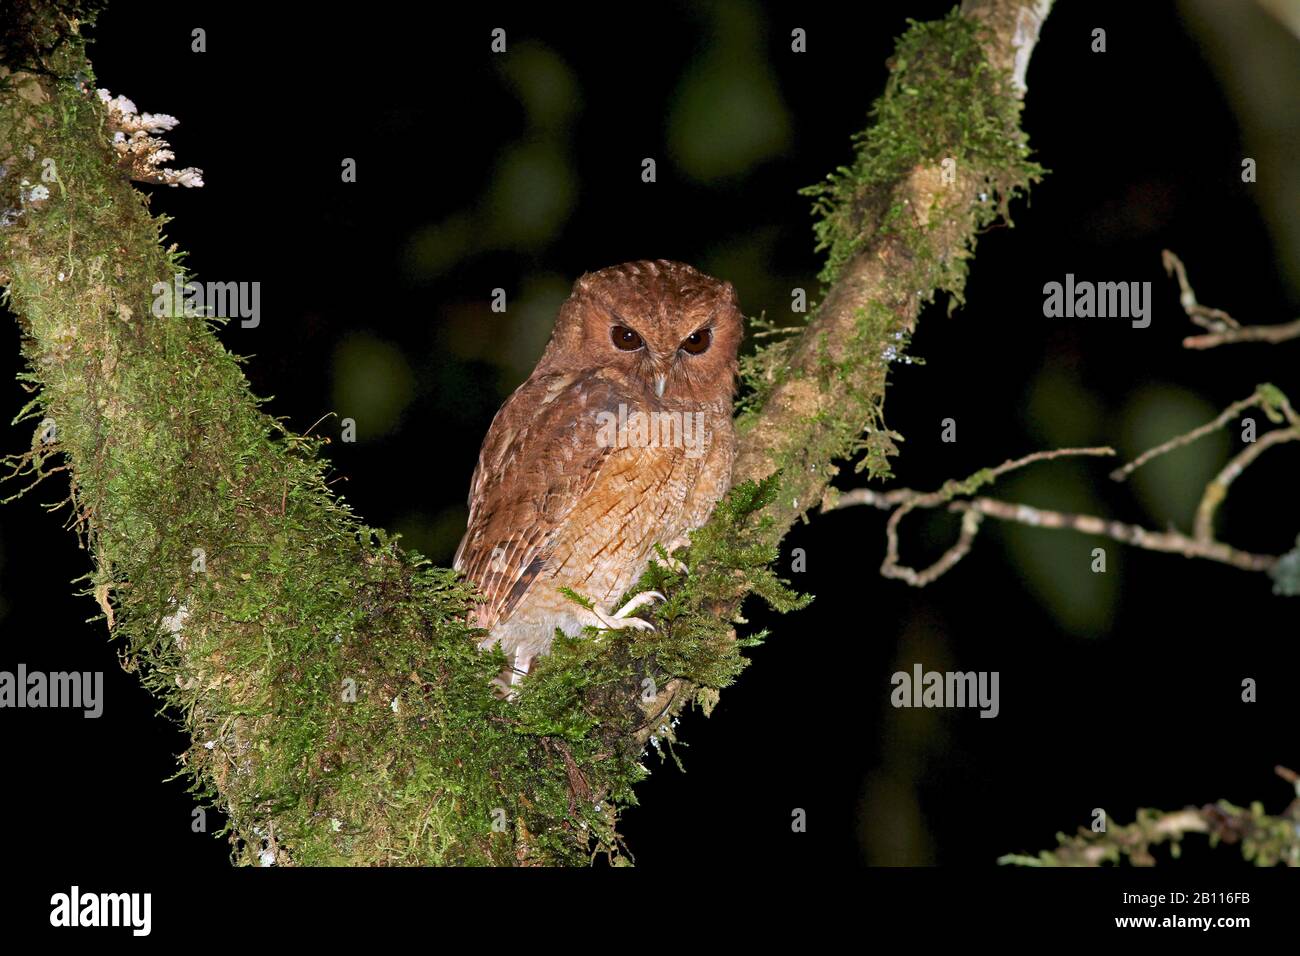 Colombian Screech Owl (Megascops colombianus), sits in a branch fork at night, Colombia Stock Photo